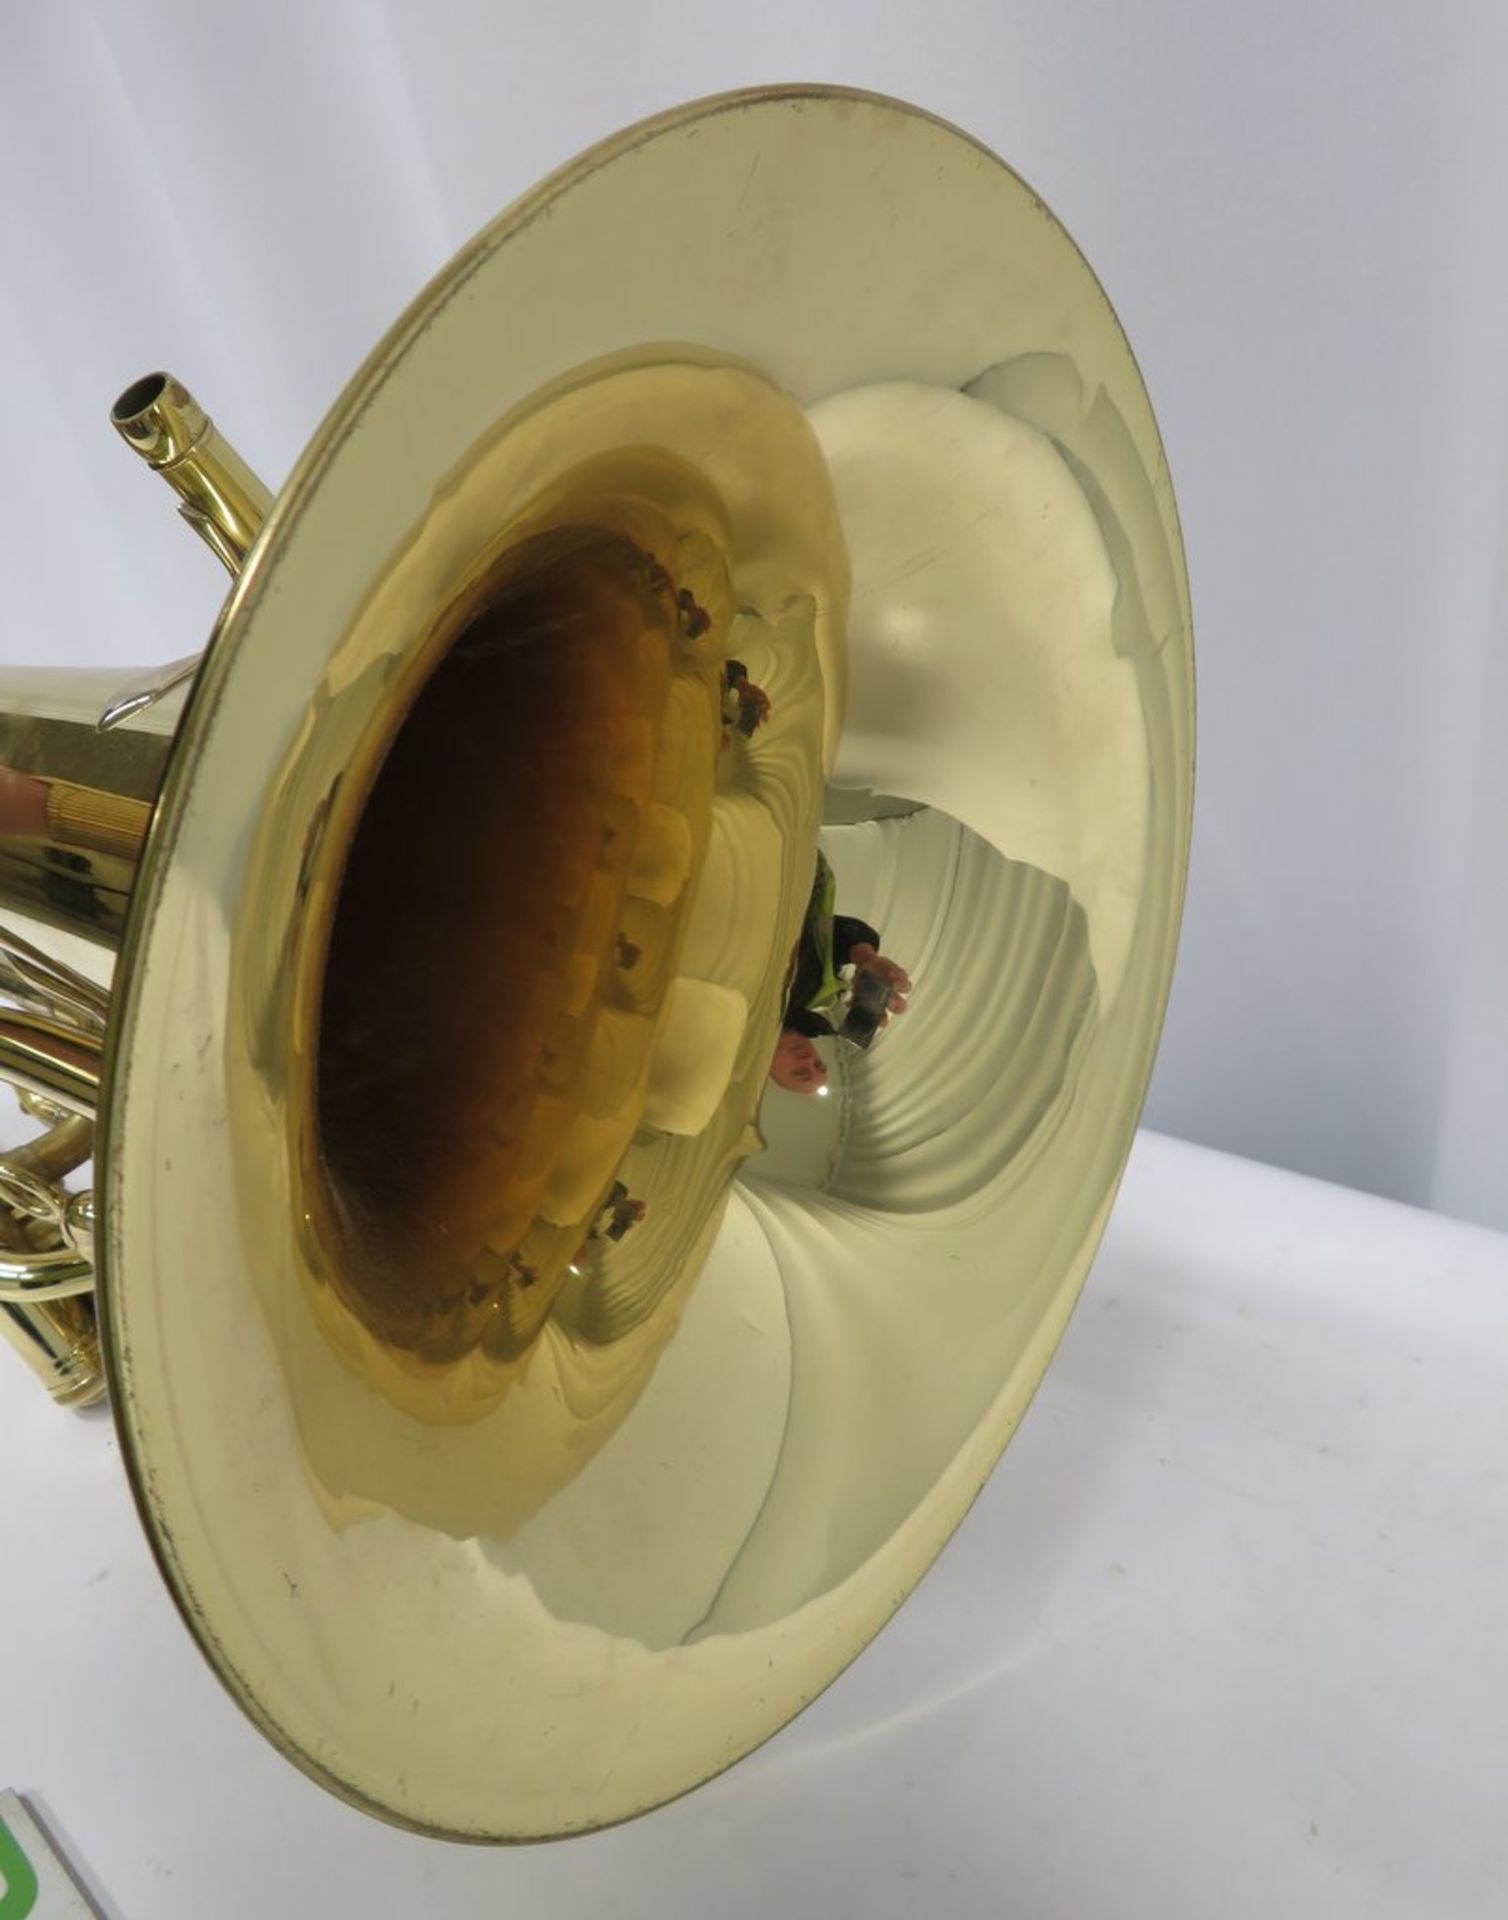 Besson Prestige BE2052 Euphonium With Case. Serial Number: 08300275. Please Note This Ite - Image 13 of 16